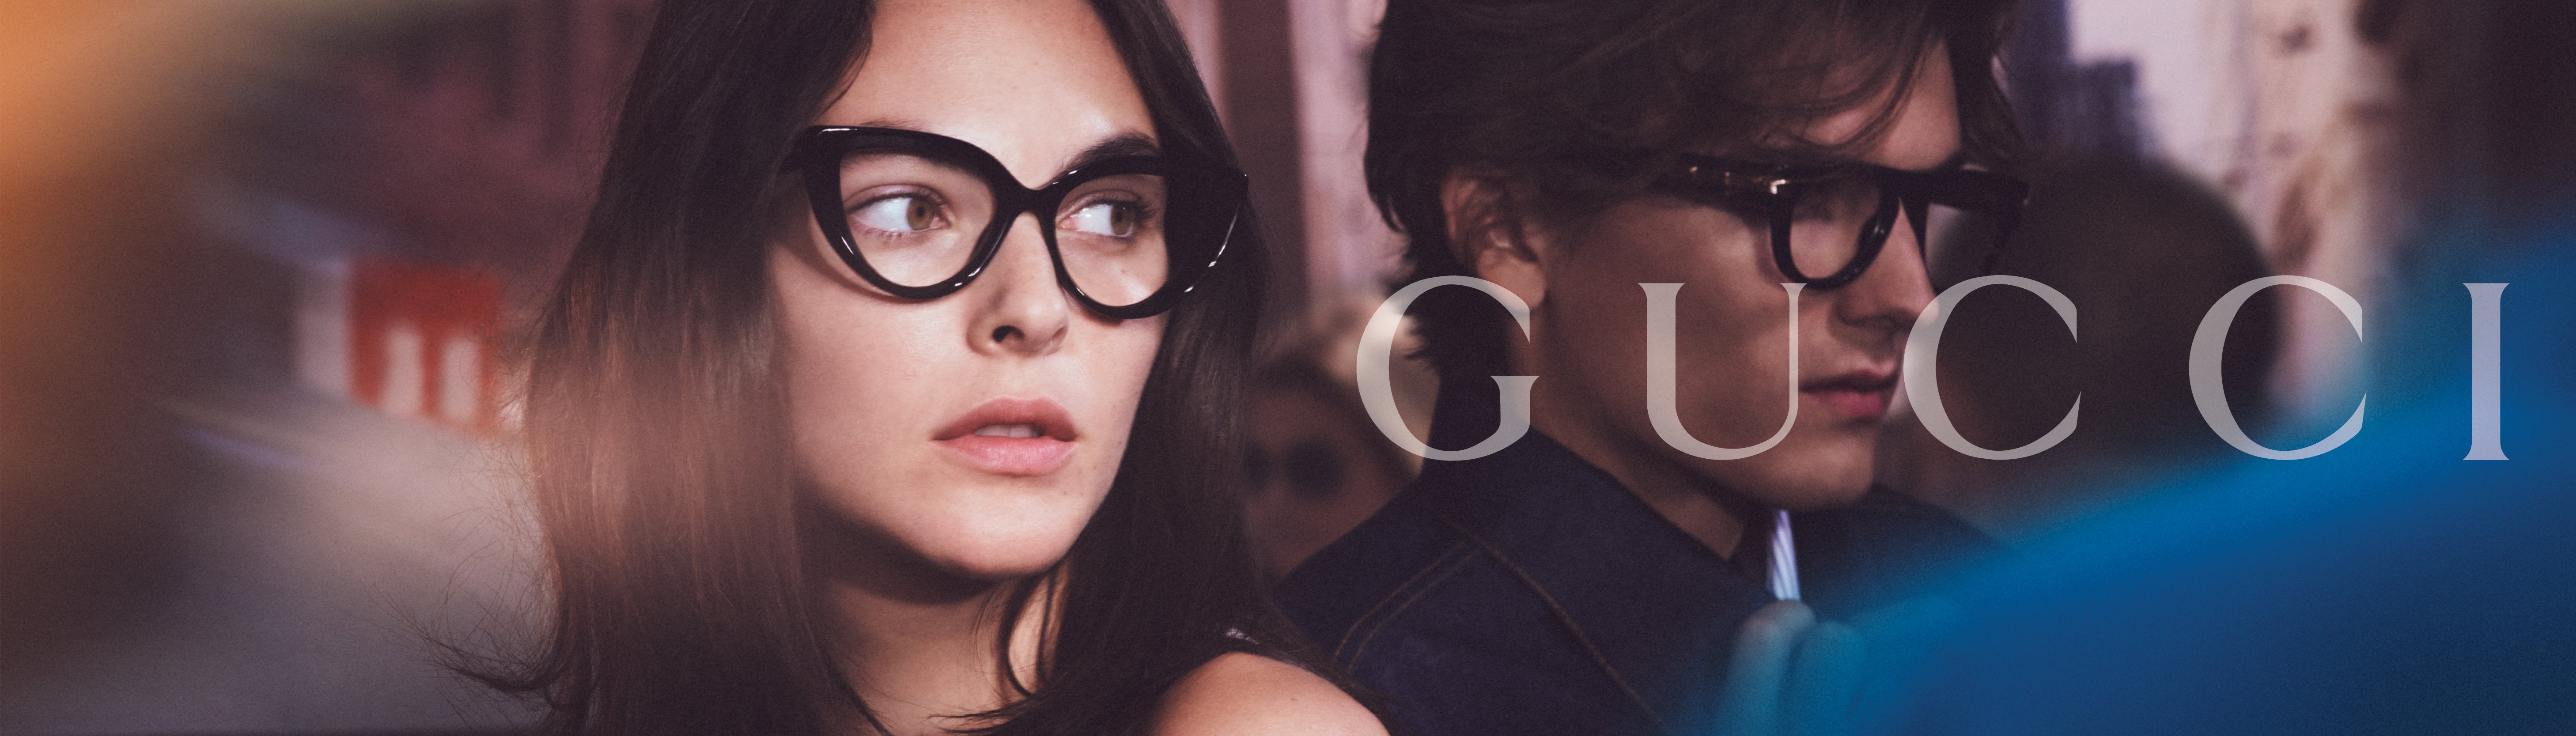 Gucci Most Popular Sunglasses for 2021 - Eyewear Frame Trends